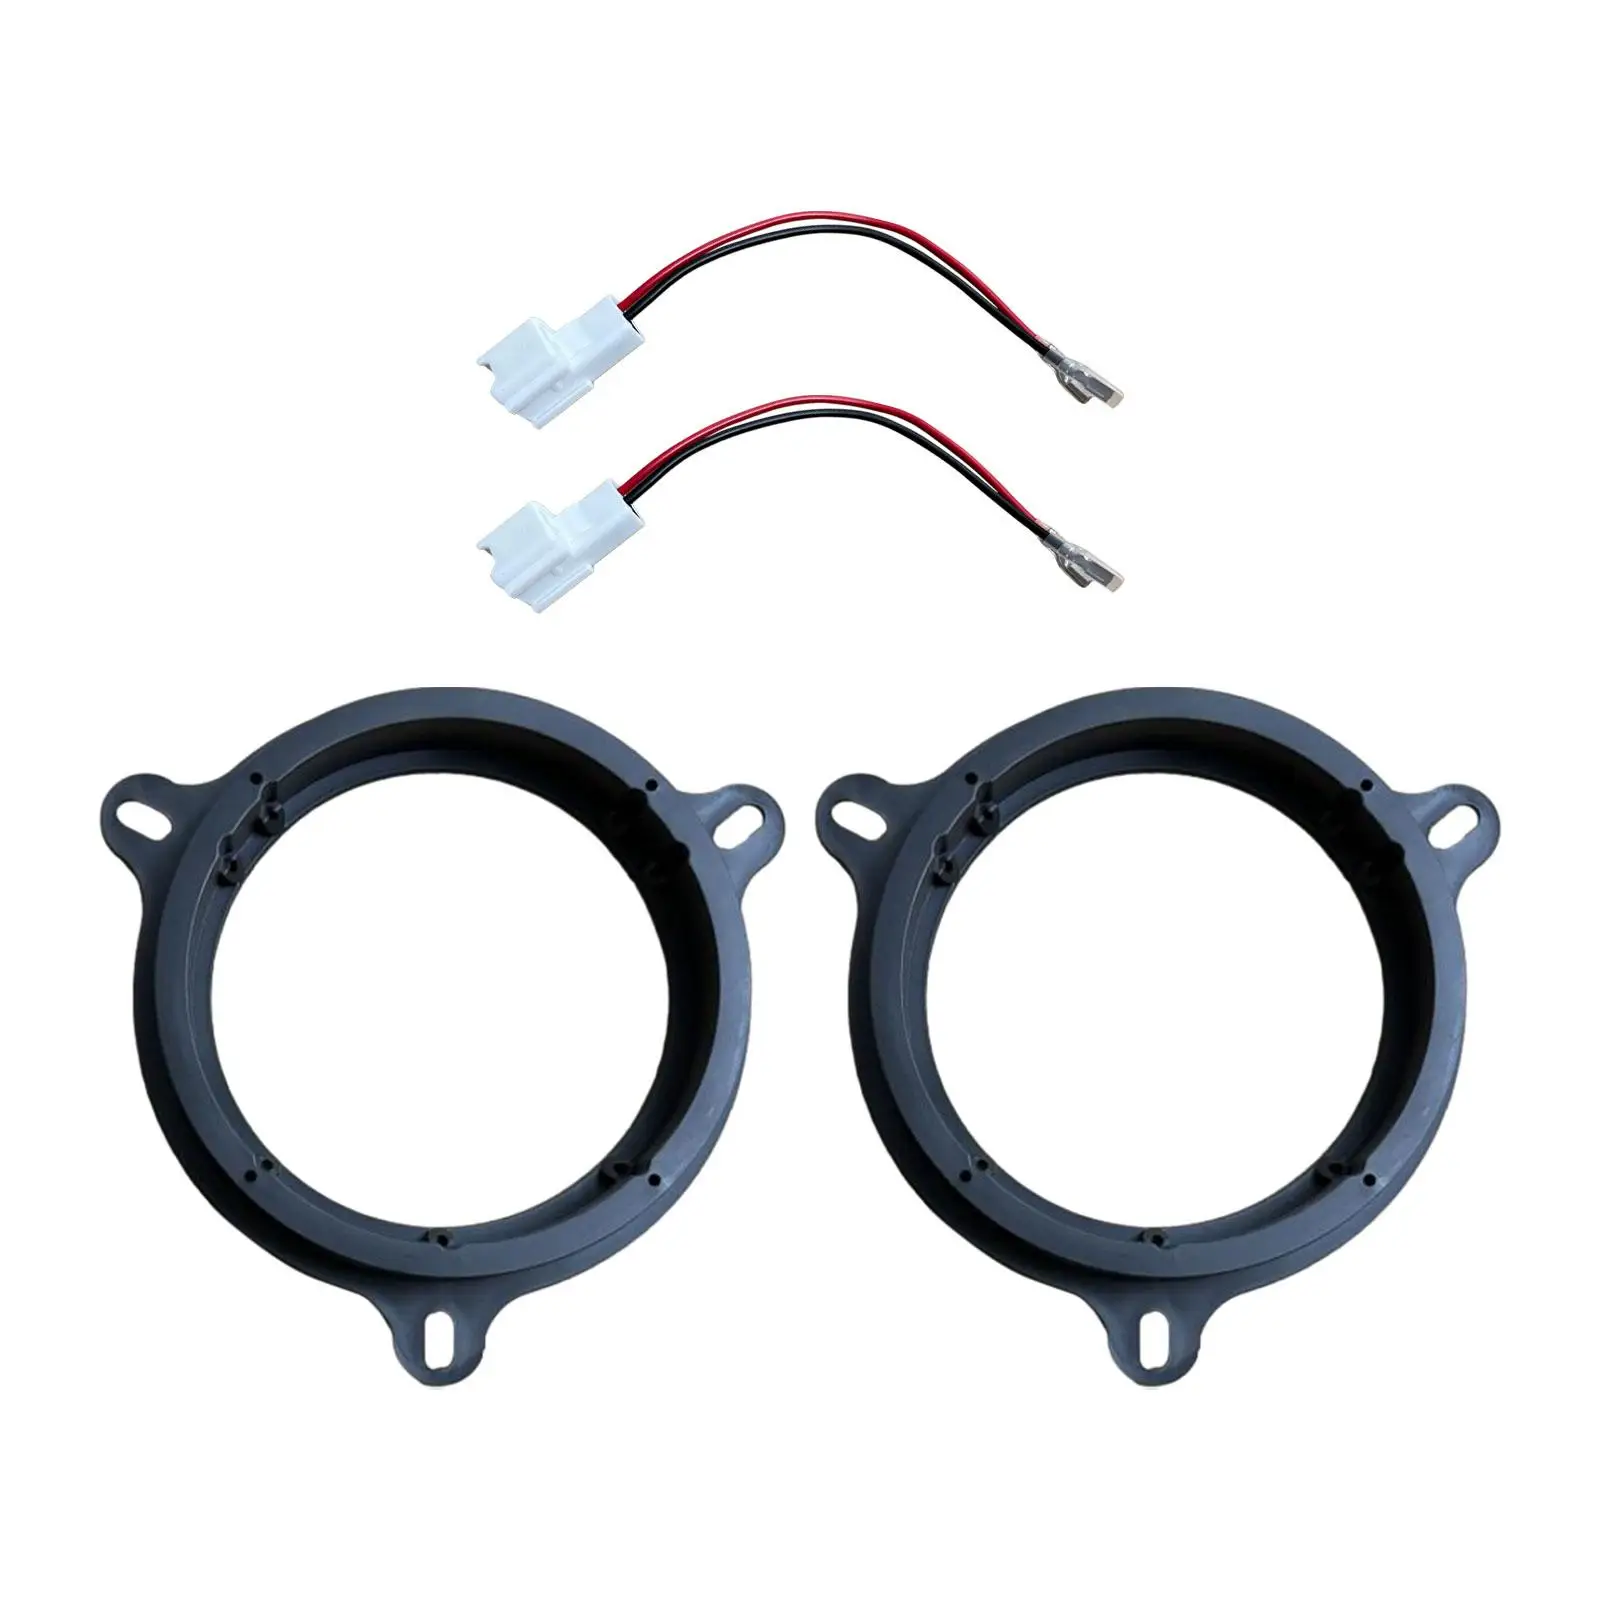 Wiring Harness Set Audio Washers Spacer Gasket Mount Shims Mounting Replacement Car Speaker Spacer Adapter Fitting